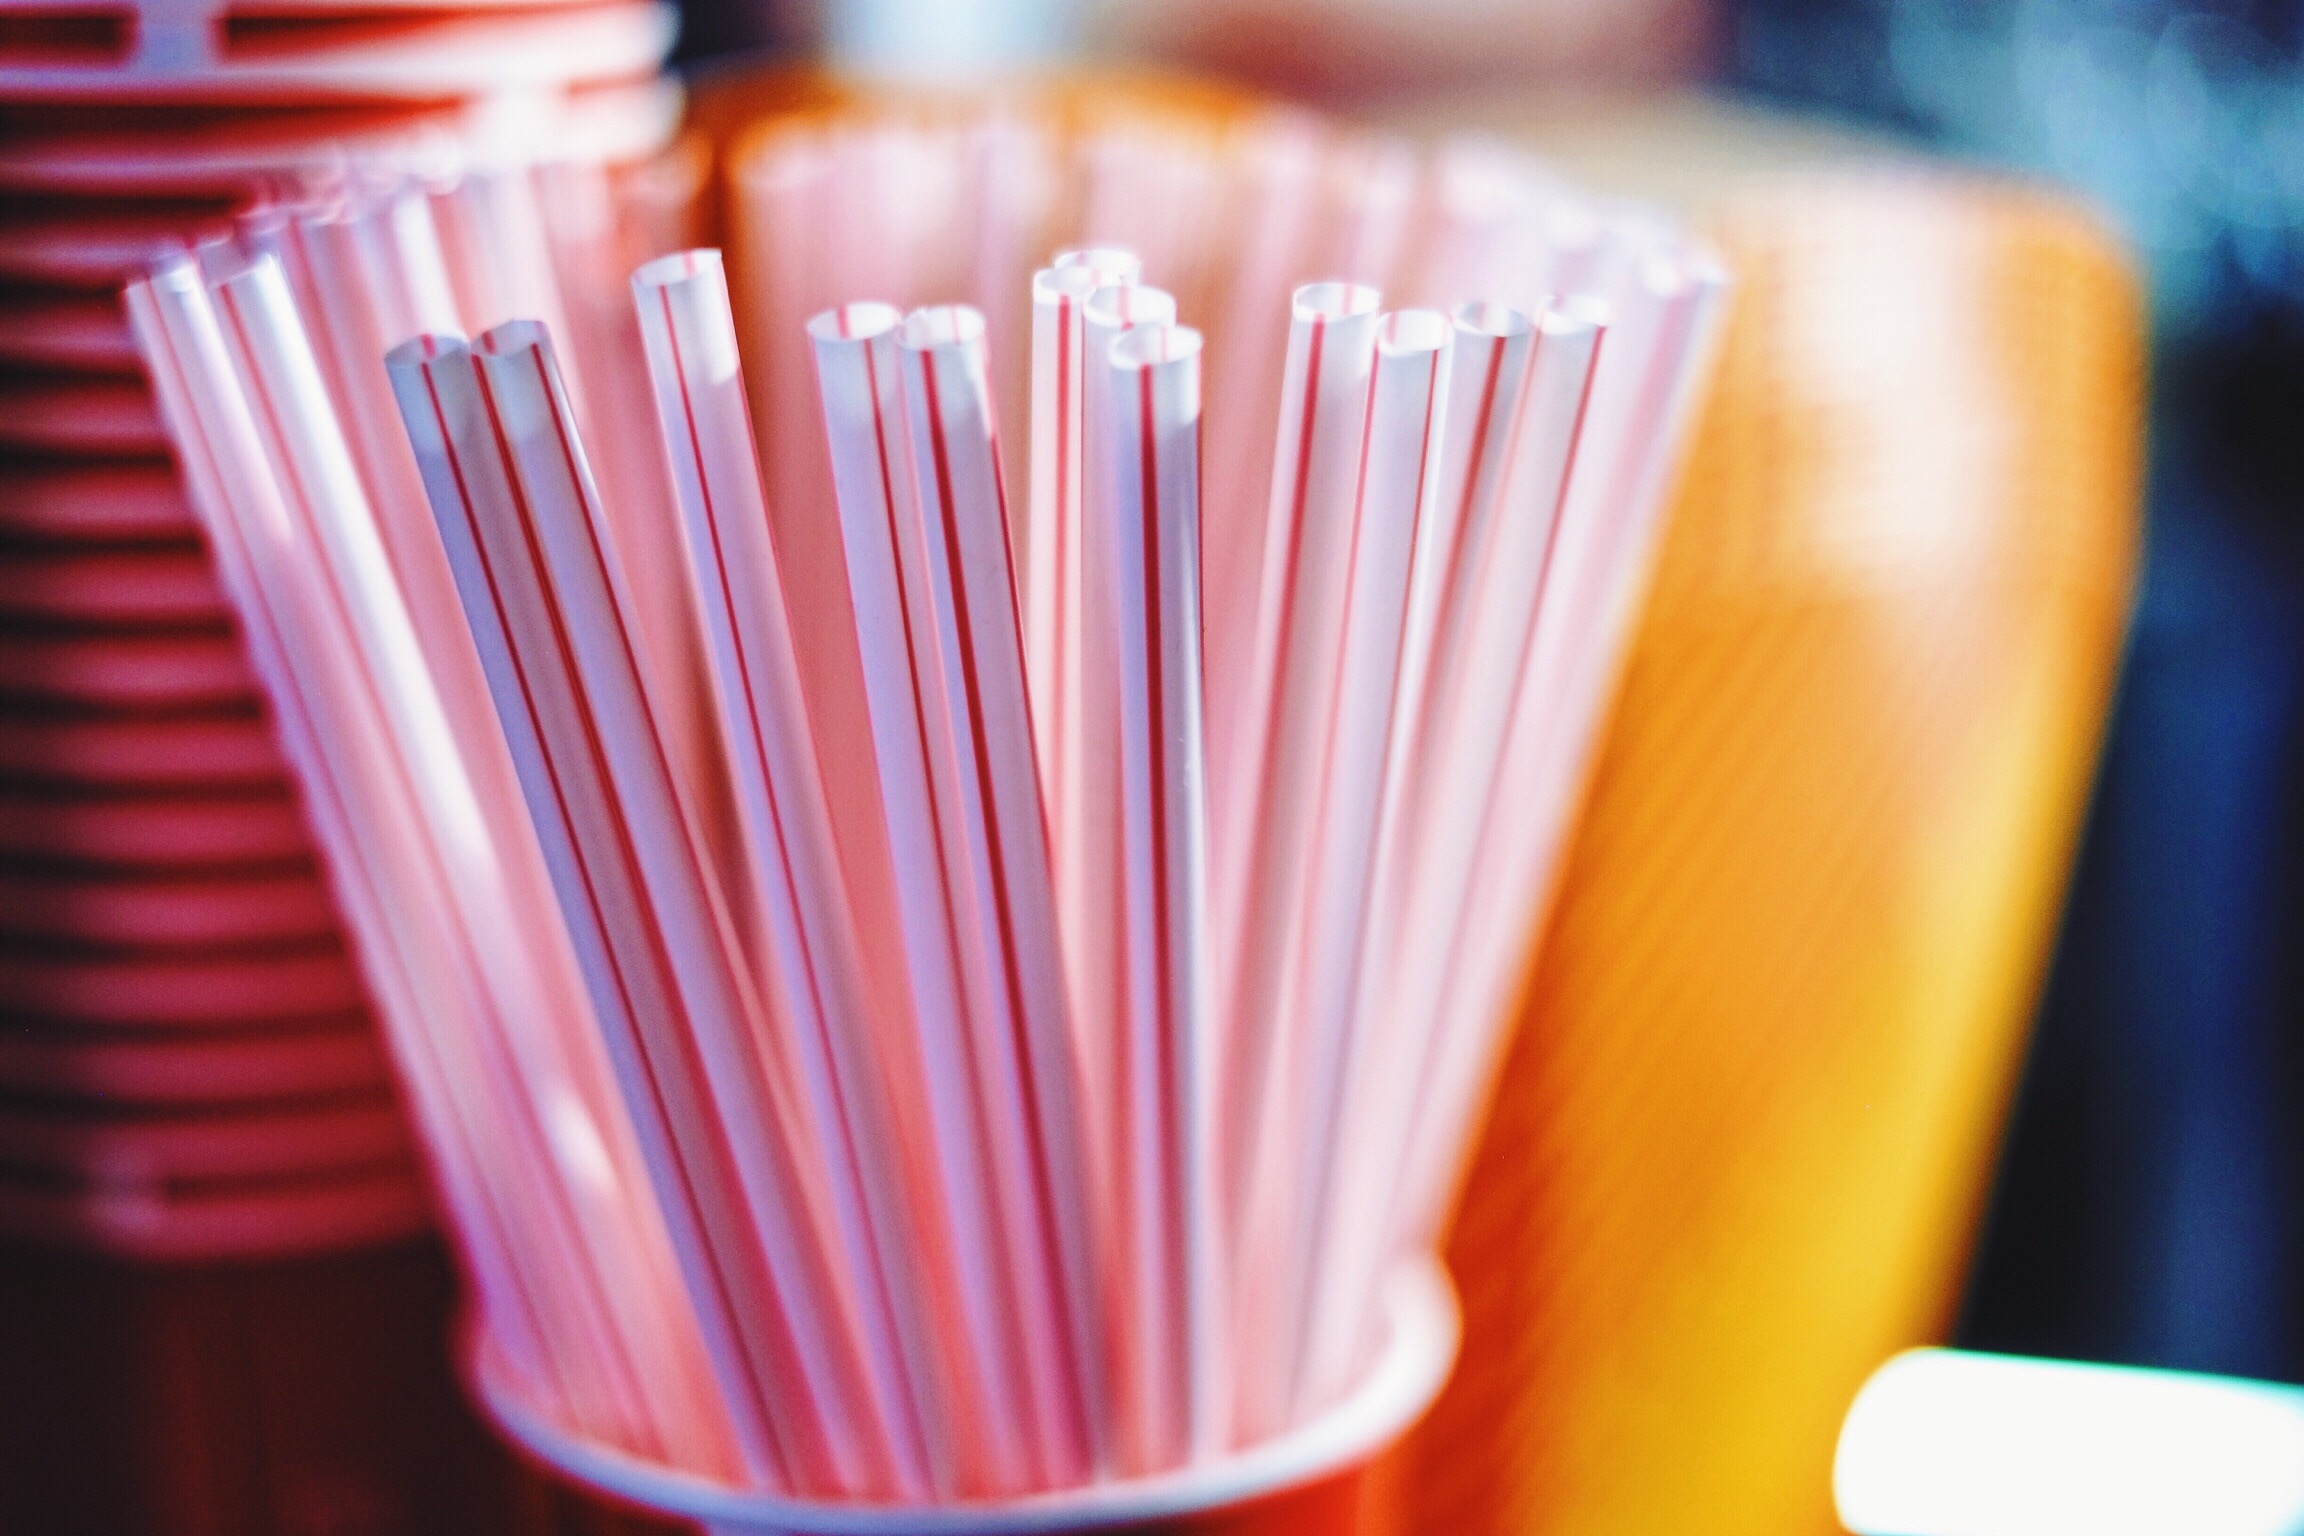 One of the easiest things you can do is to switch out your straws